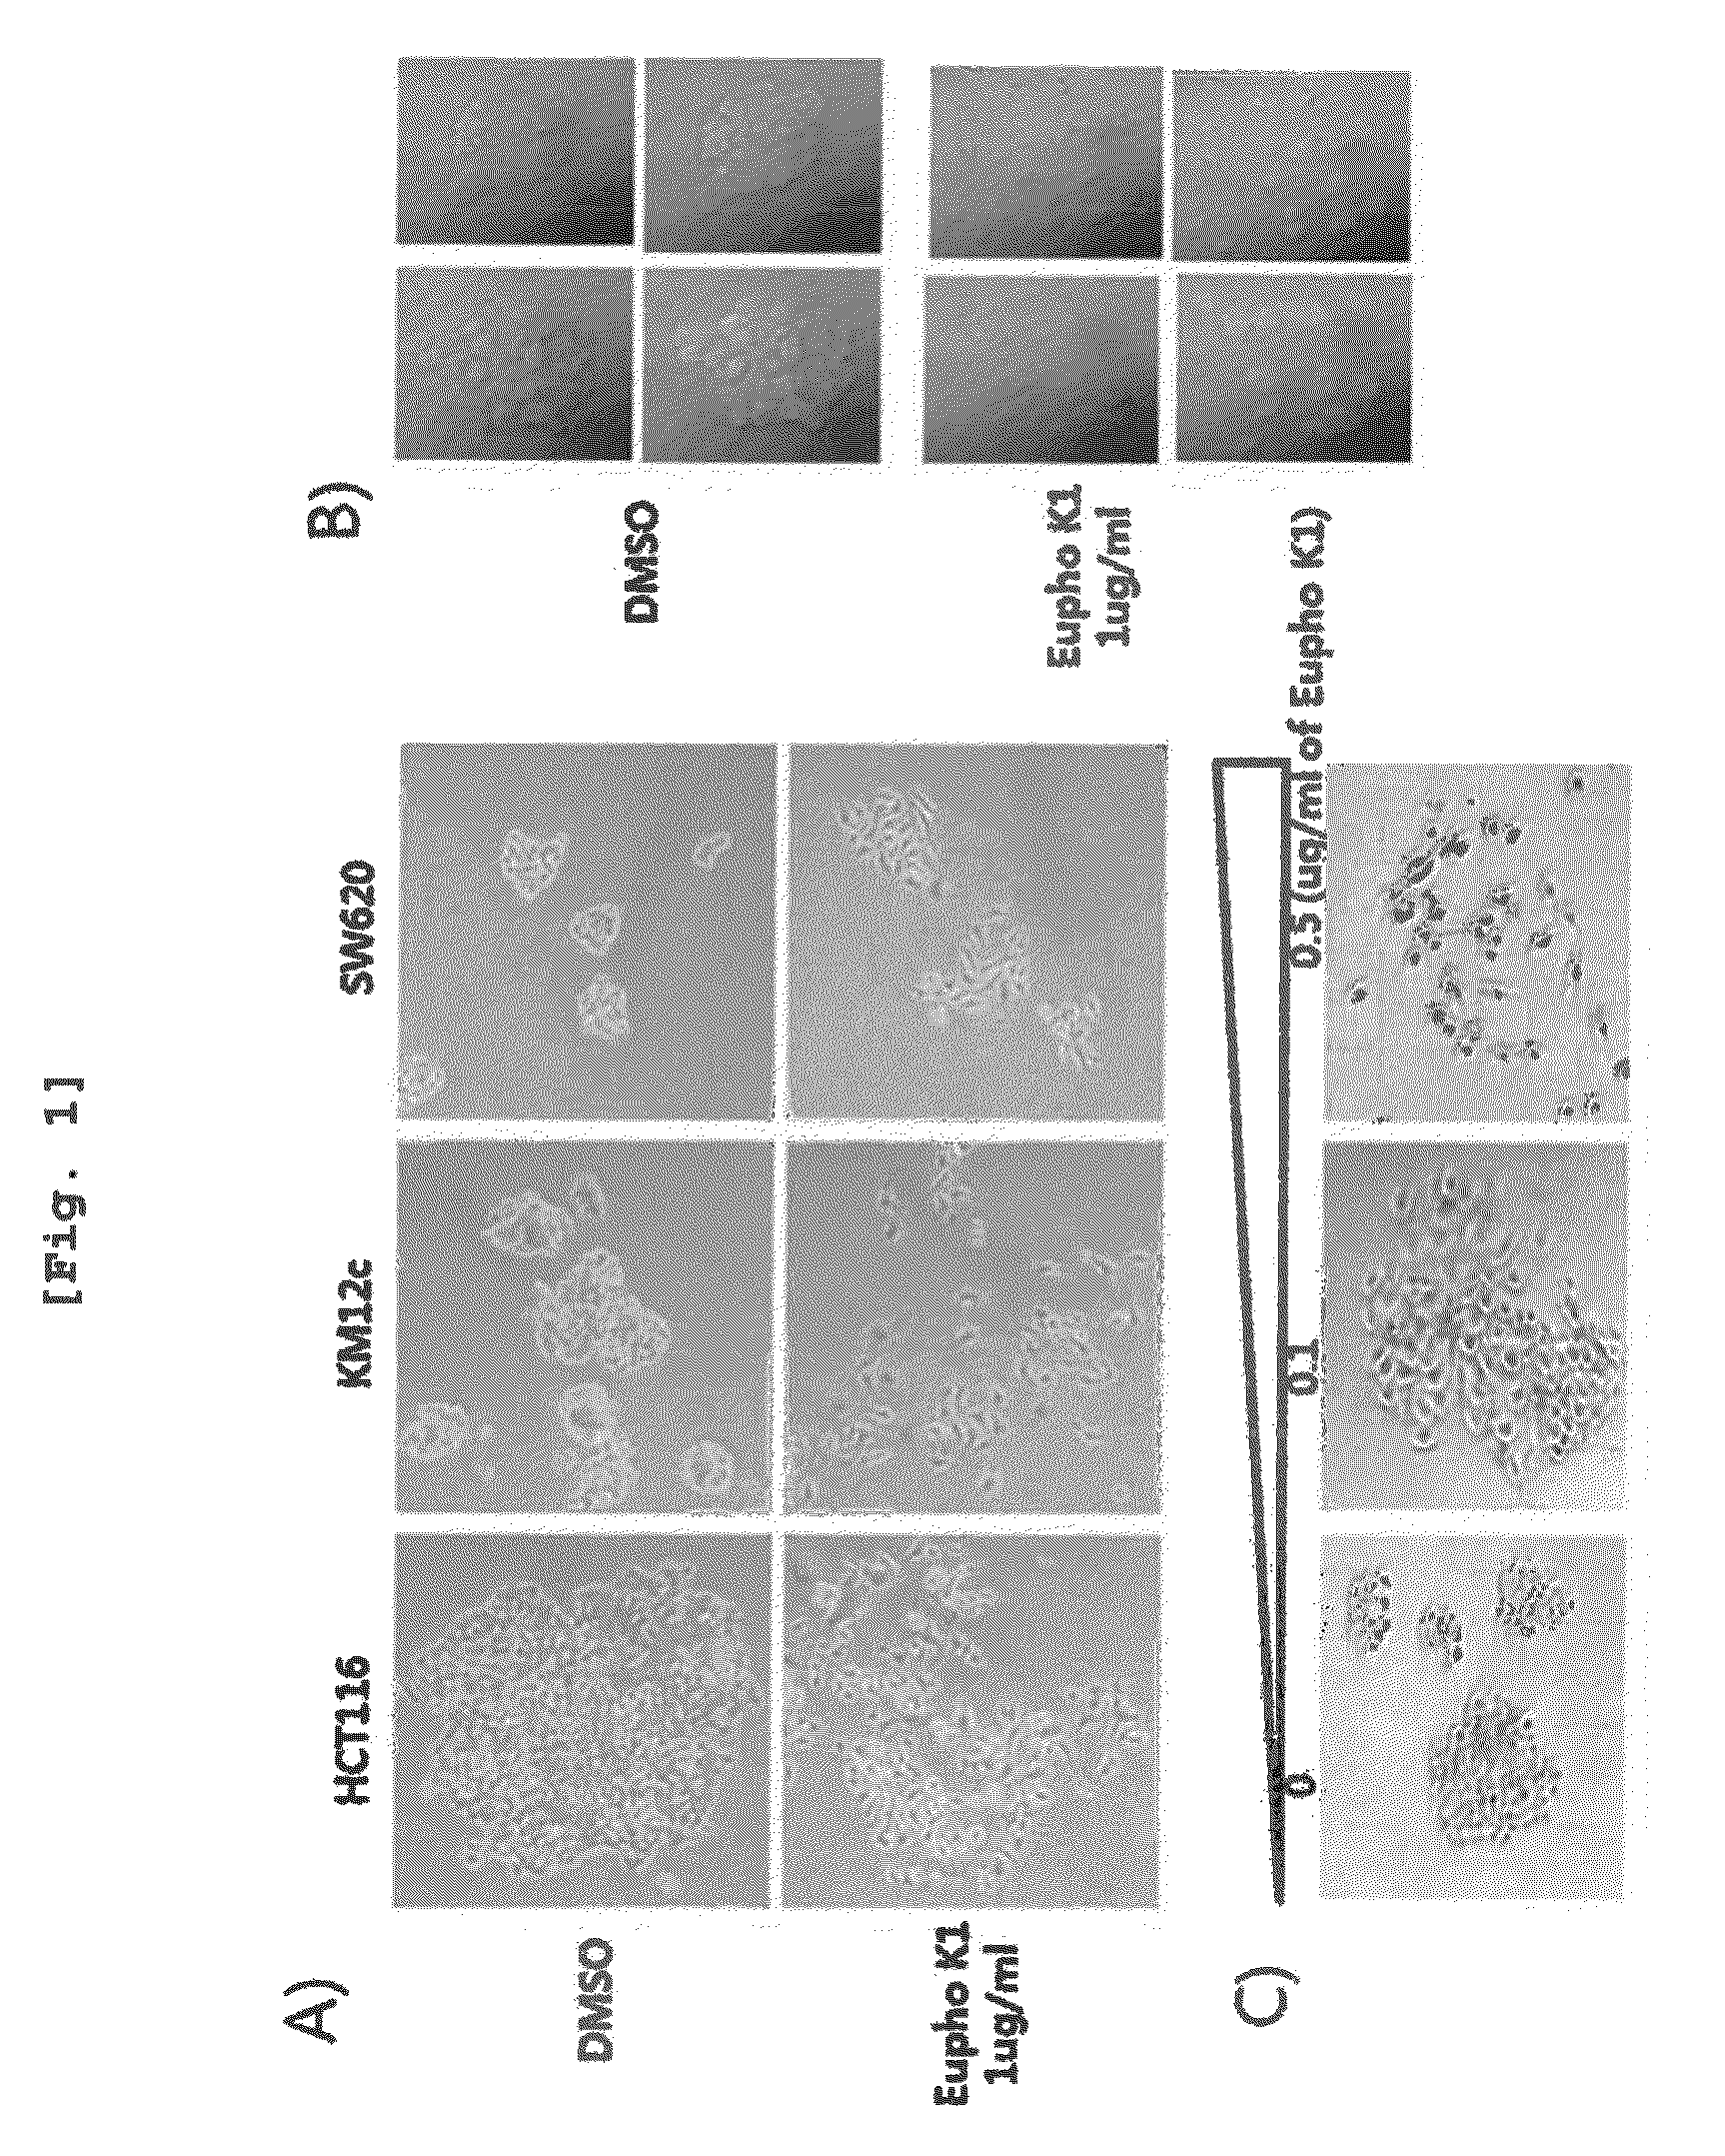 Pharmaceutical composition for treating wounds or revitalizing skin comprising euphorbia kansui extracts, fractions thereof or diterpene compounds separated from the fractions as active ingredient